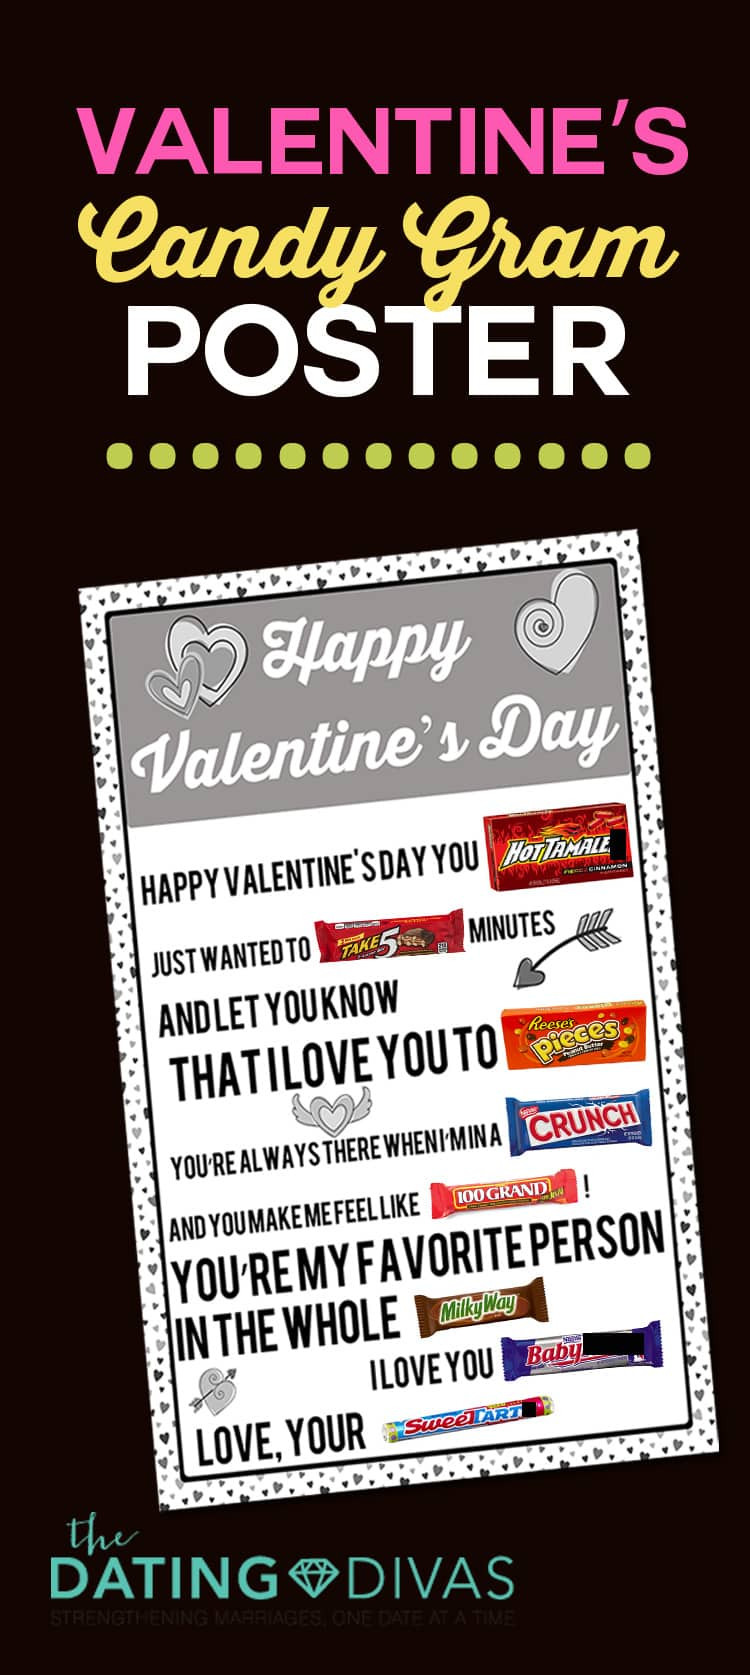 Valentines Day Candy Poster
 Printable Candy Gram Posters The Dating Divas